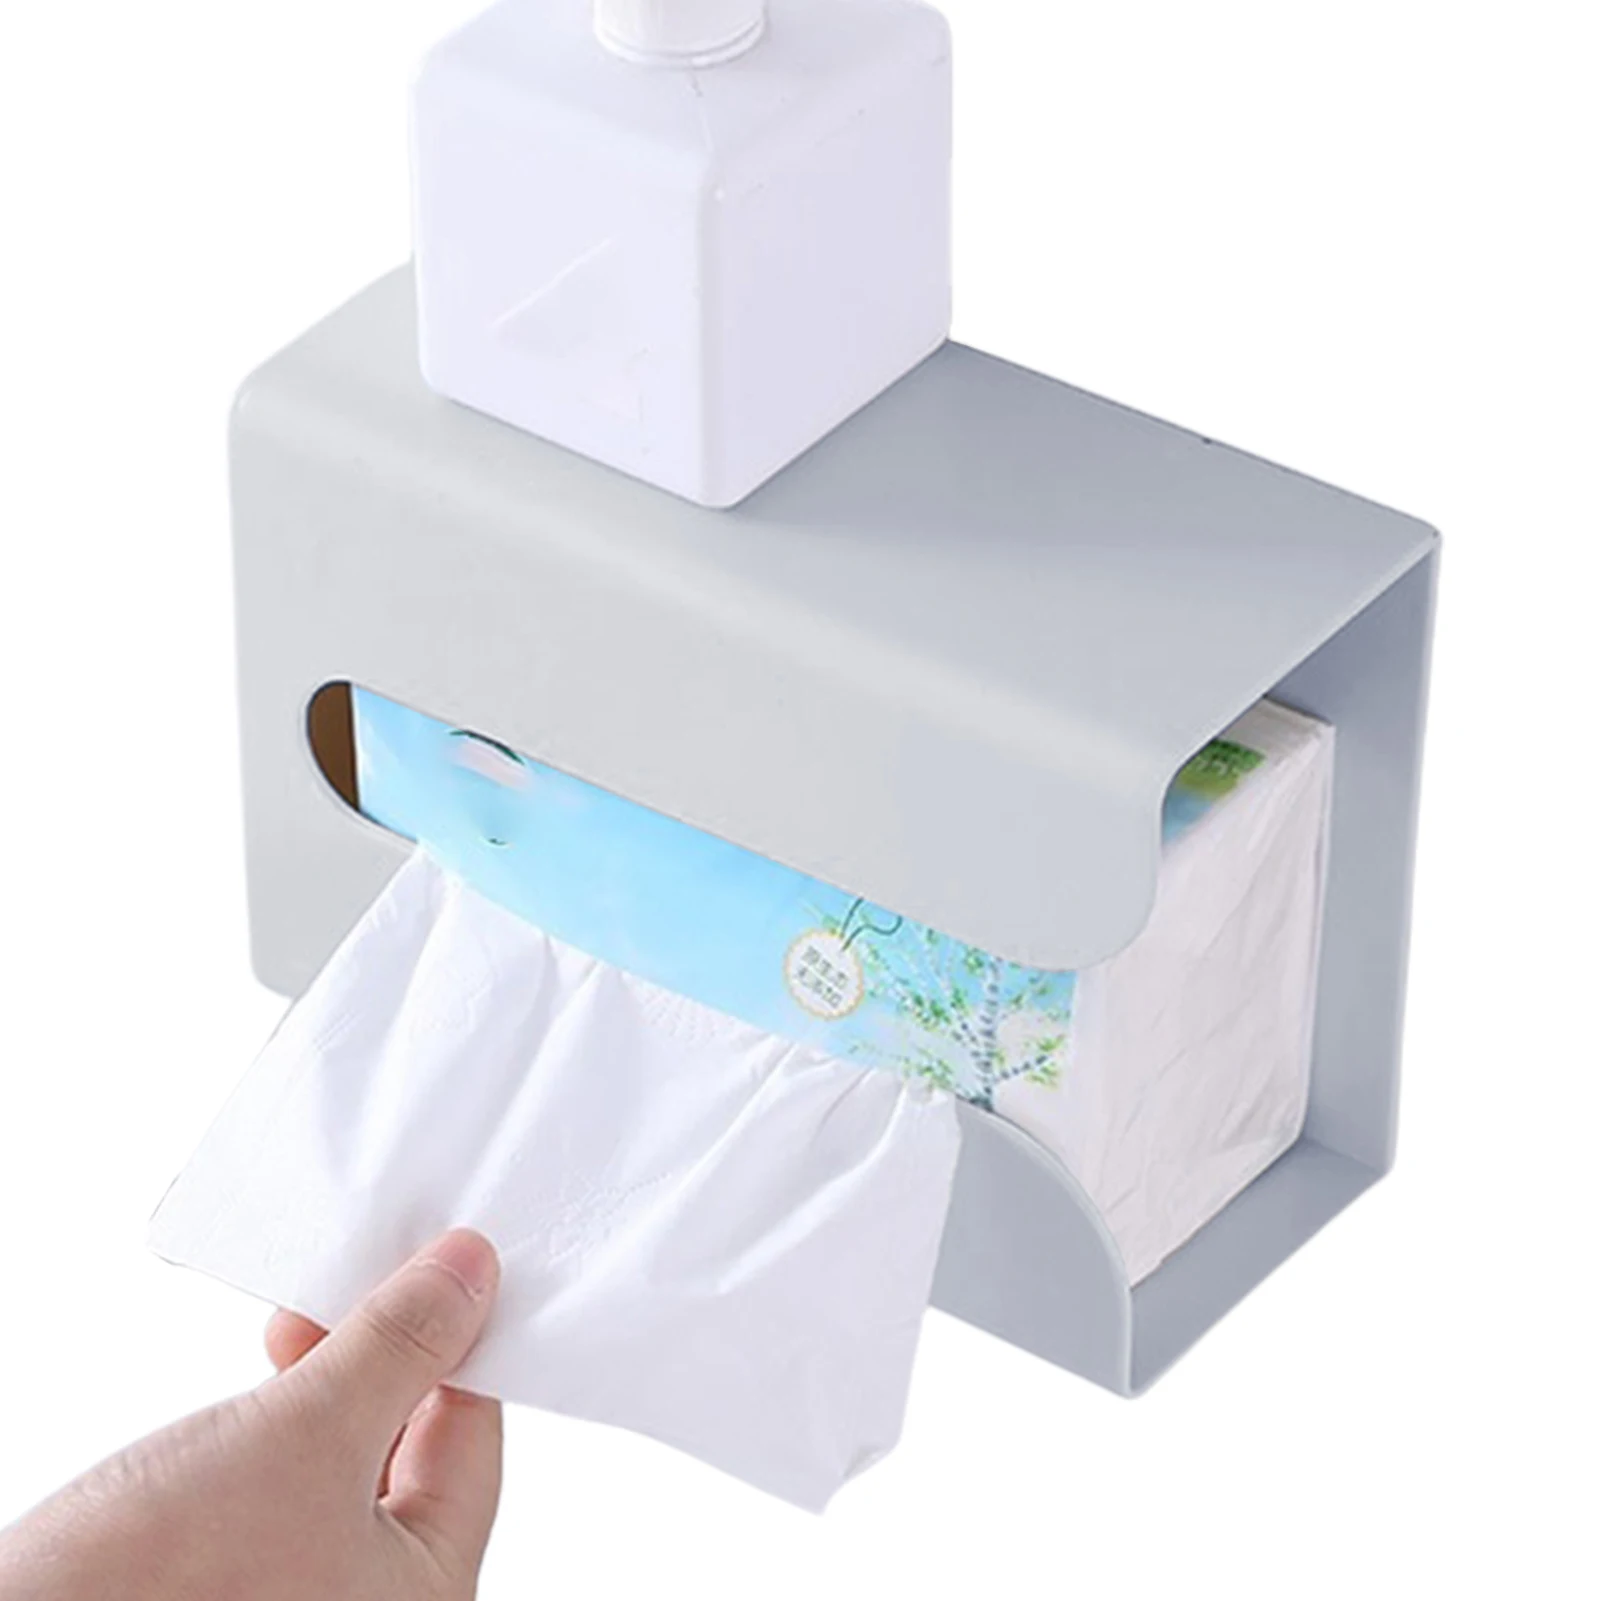 

Toilet Paper Holder Wall Mount Adhesive Tissue Box Holder Mounts To Walls And Cabinets Tissue Dispenses And Holds For Rvs